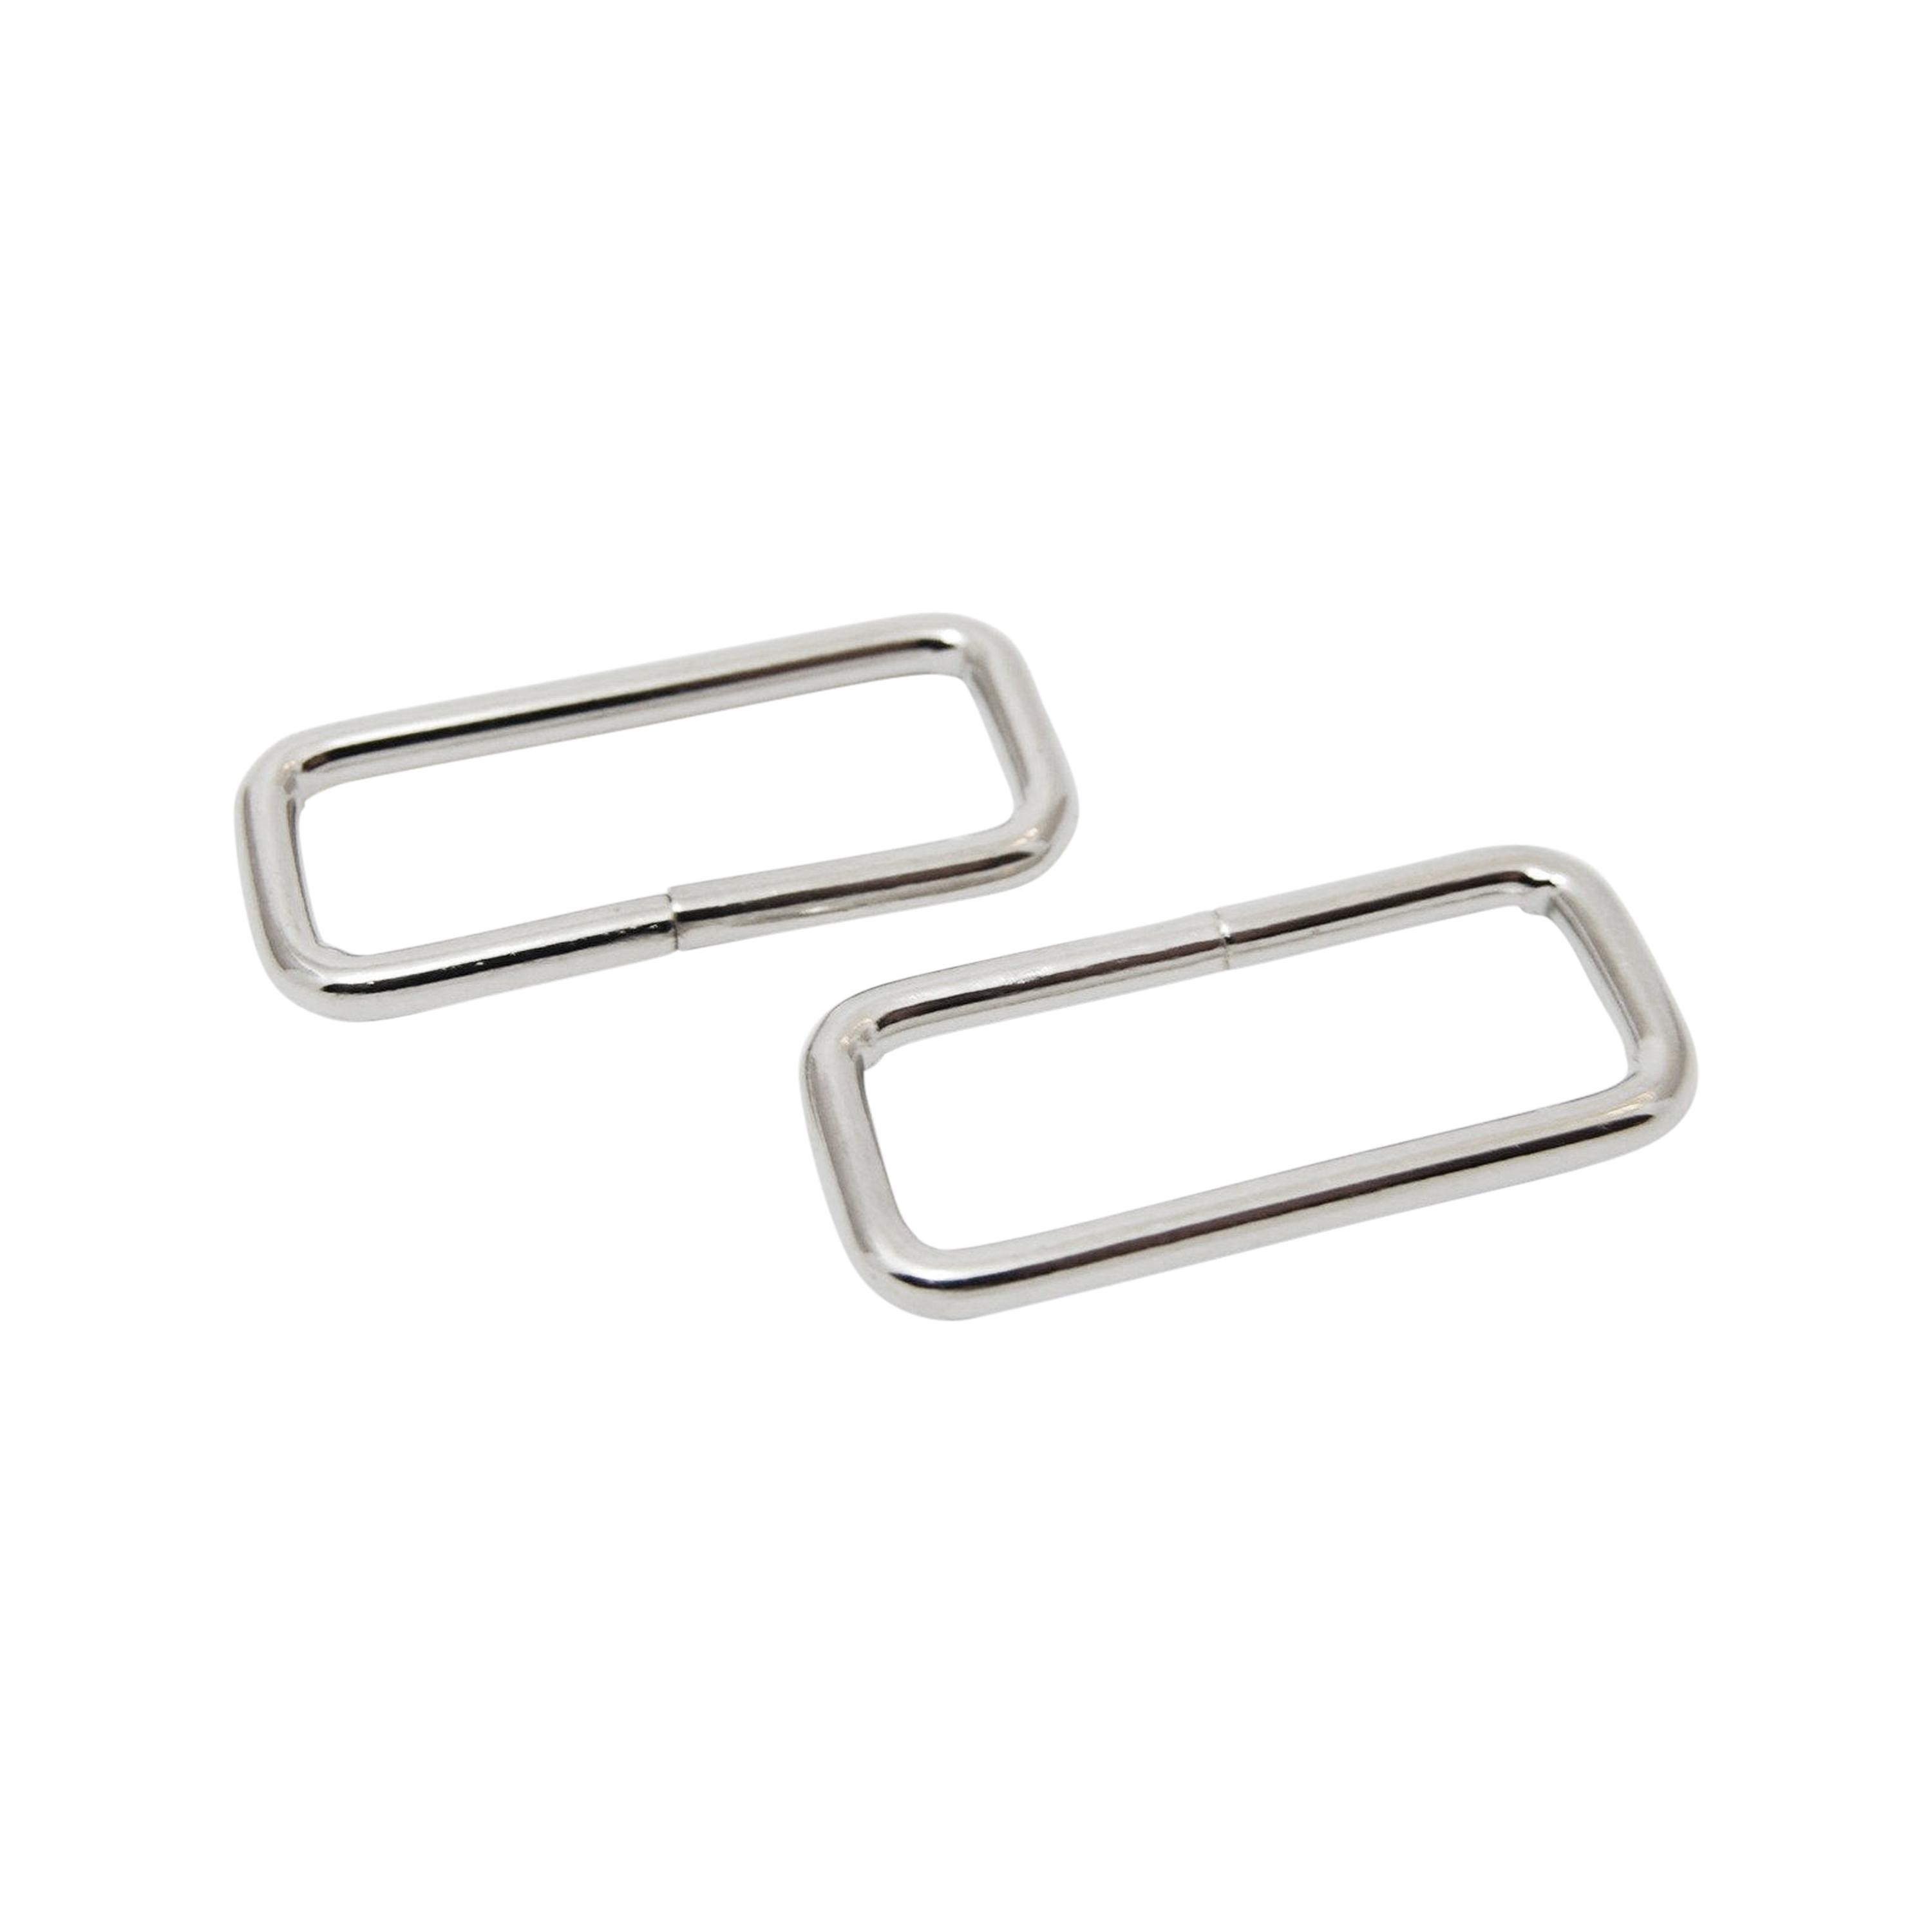 1 1/4" (32mm) wire form rectangle rings in silver